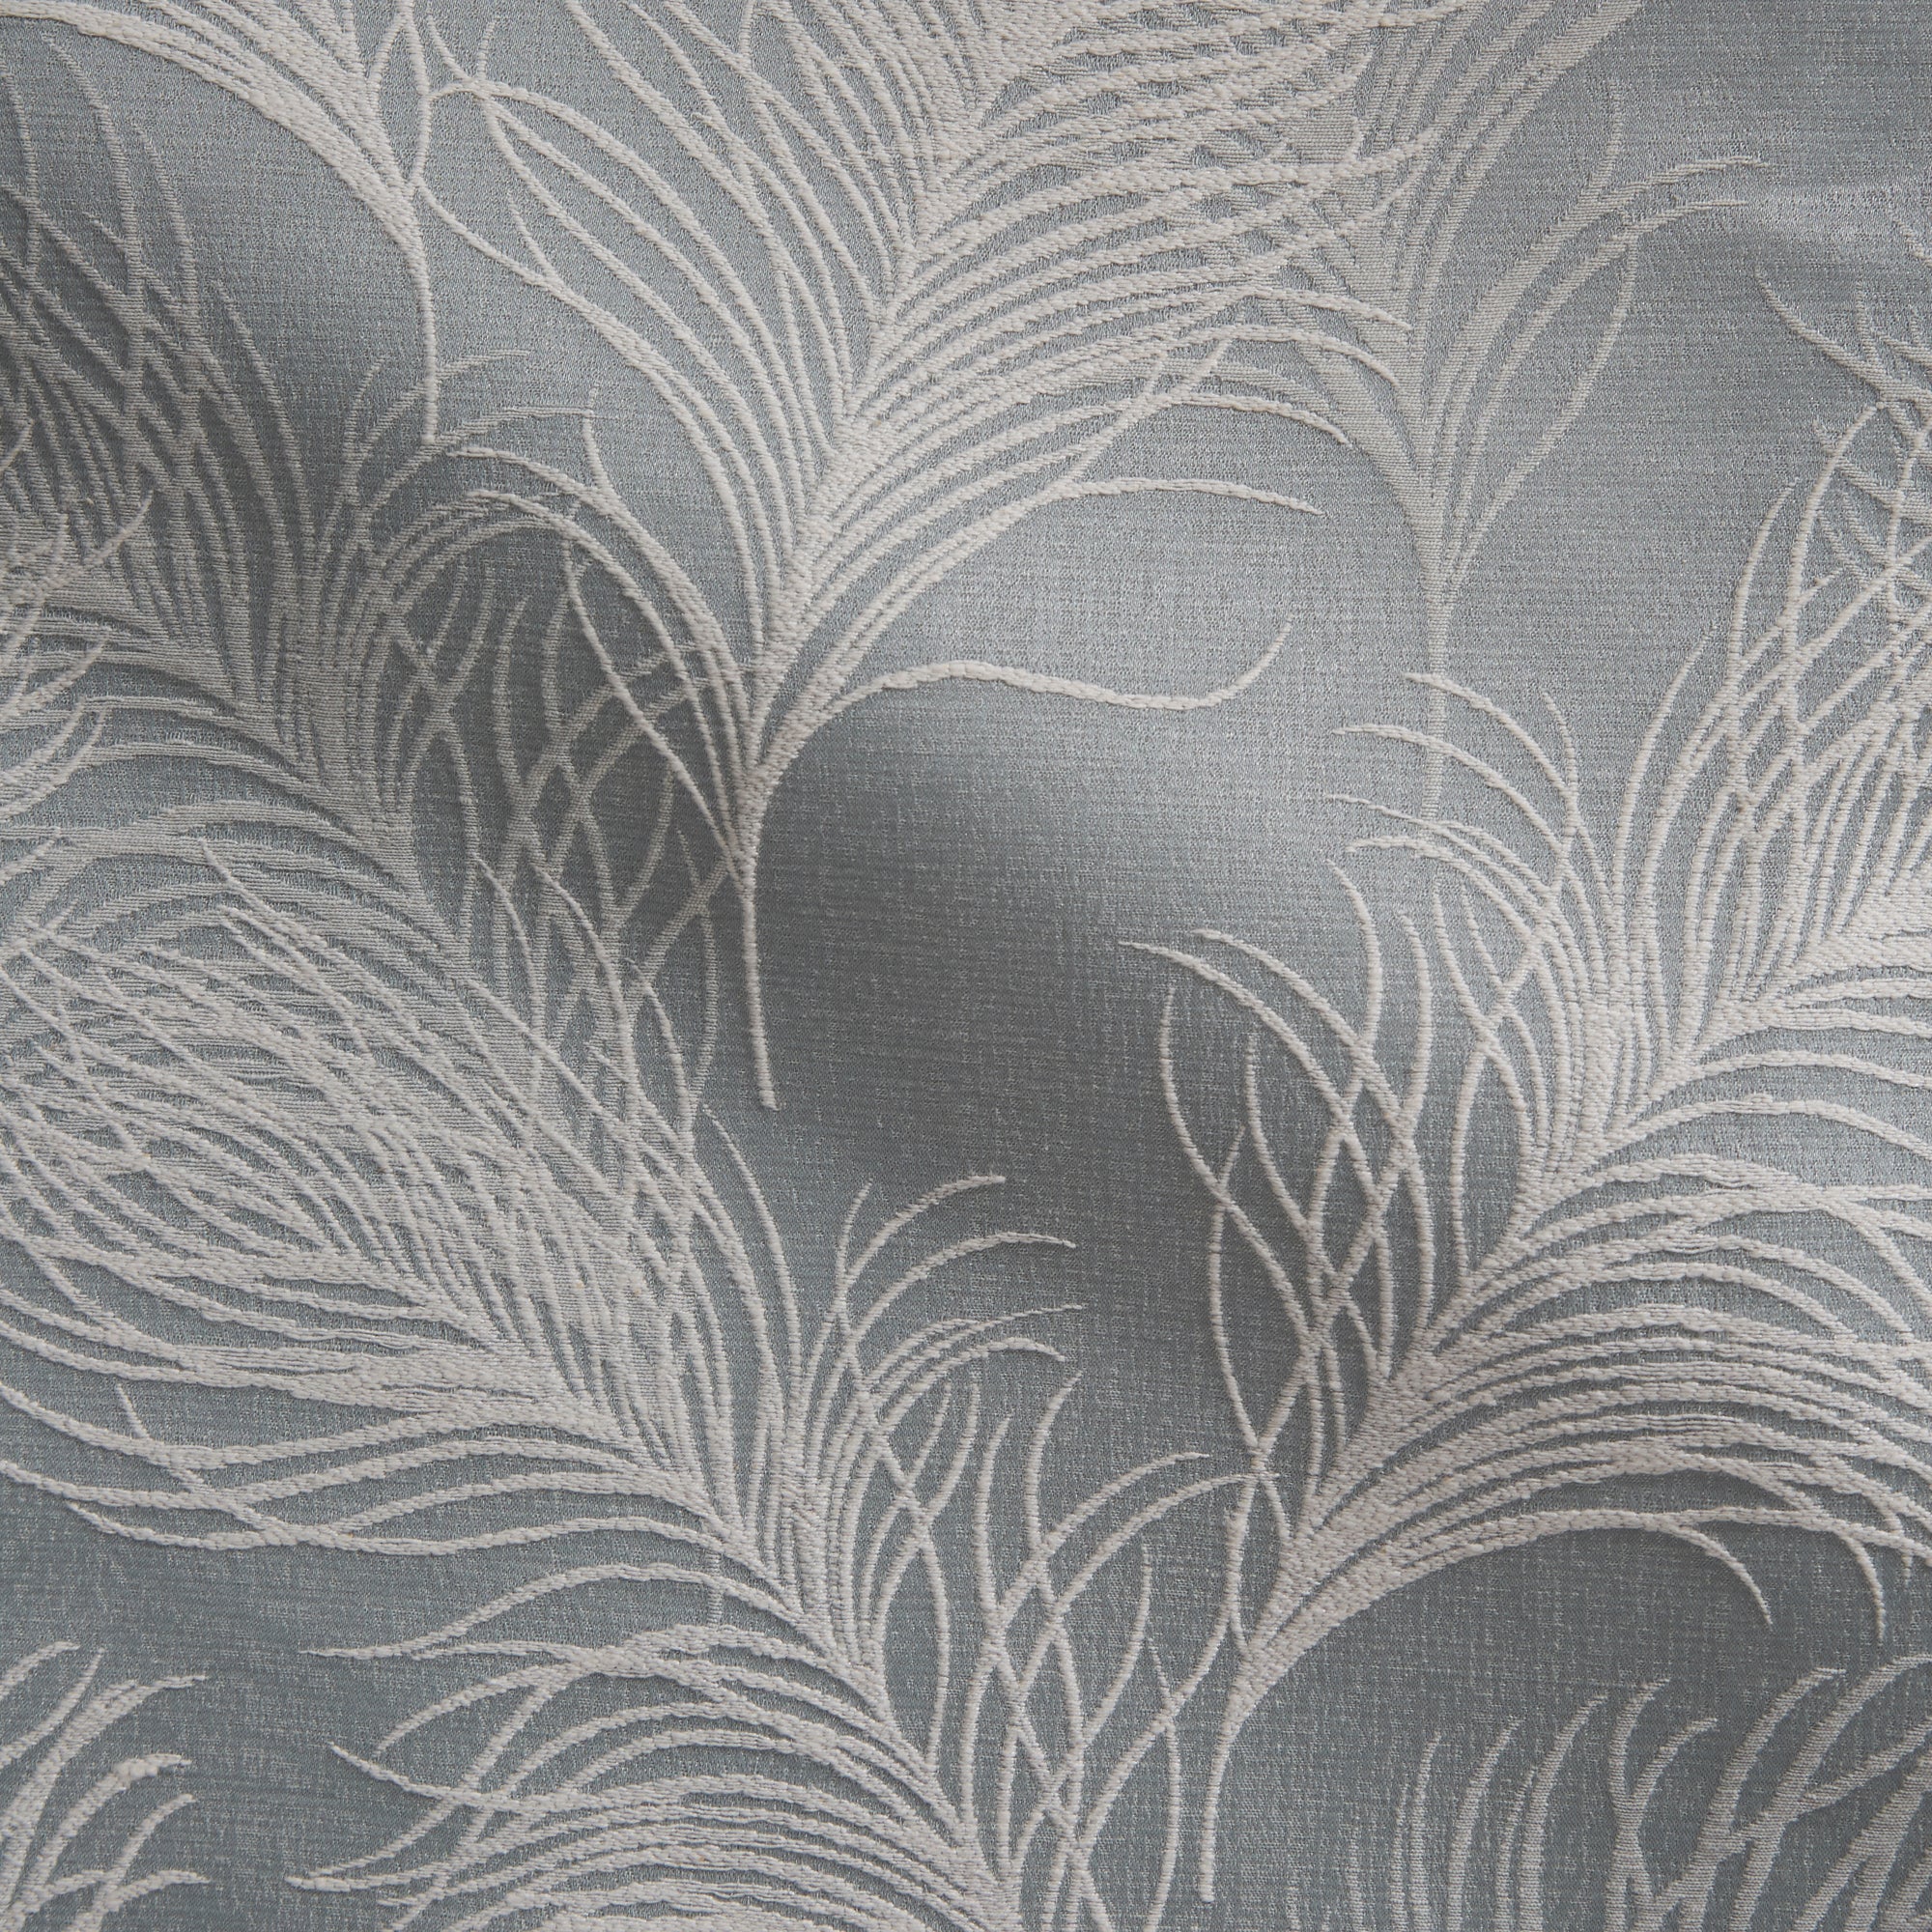 Feathers Made to Measure Fabric Sample